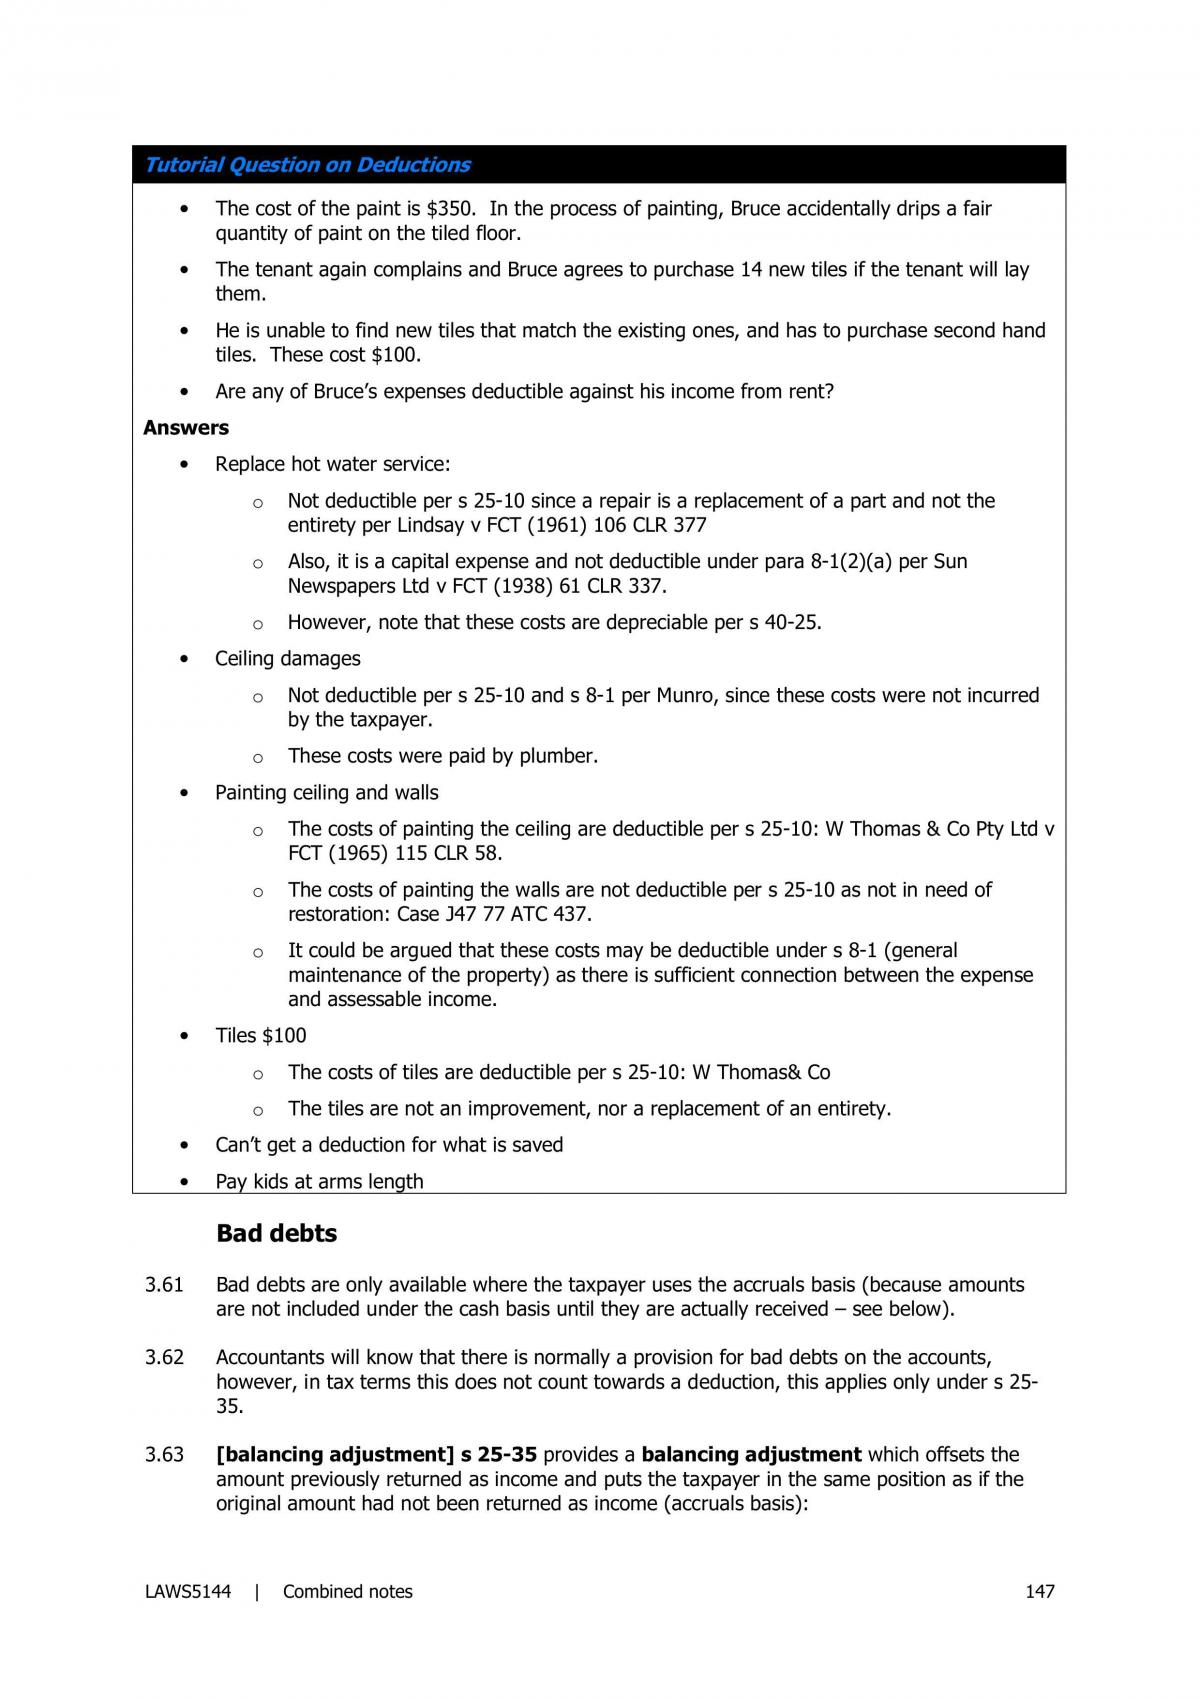 Exam Notes - Page 147